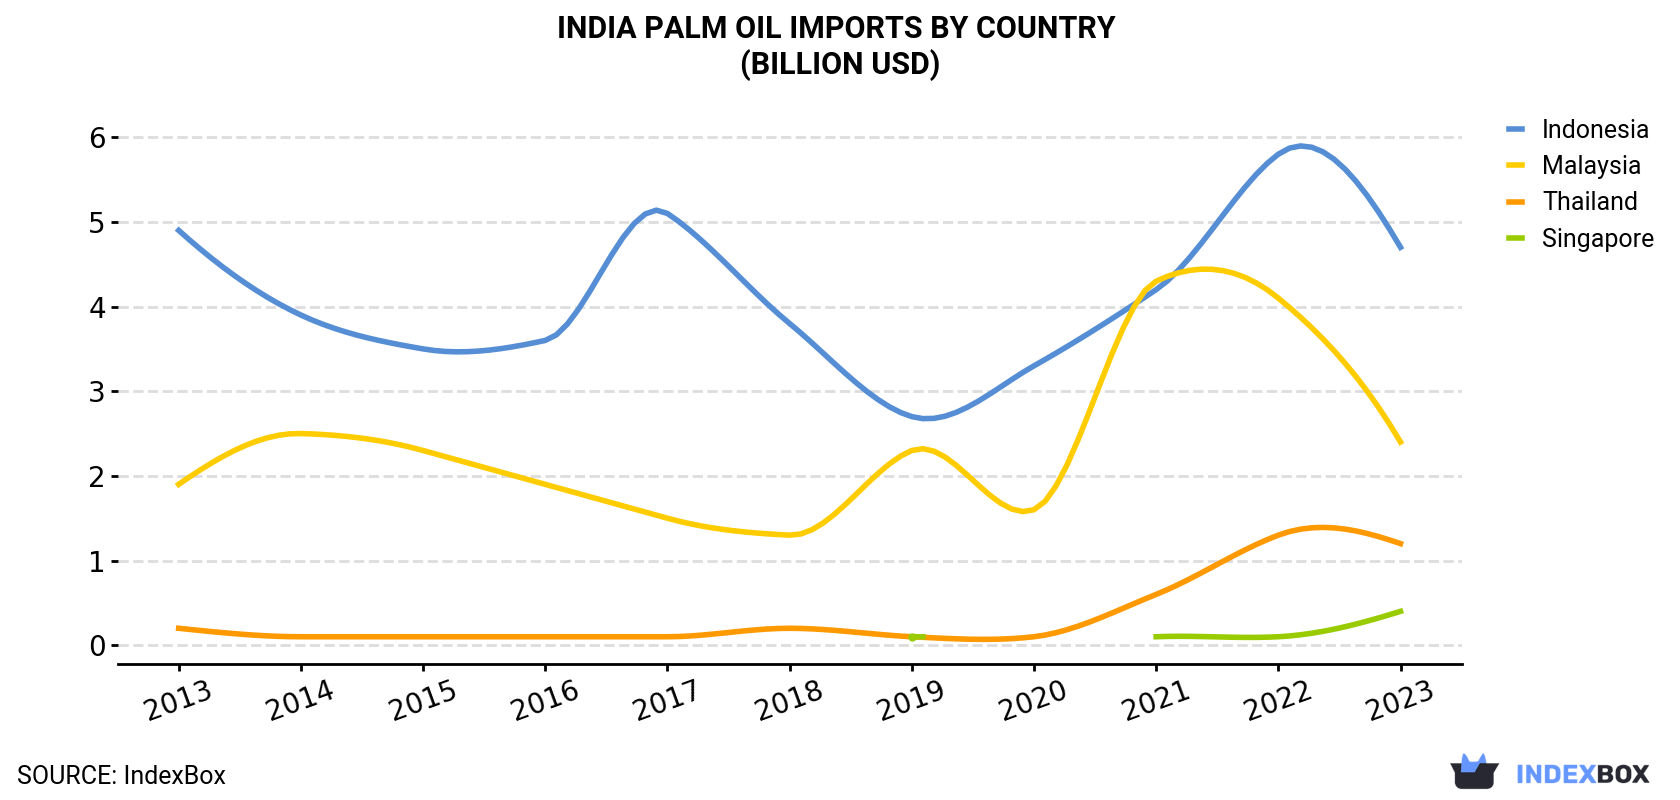 India Palm Oil Imports By Country (Billion USD)